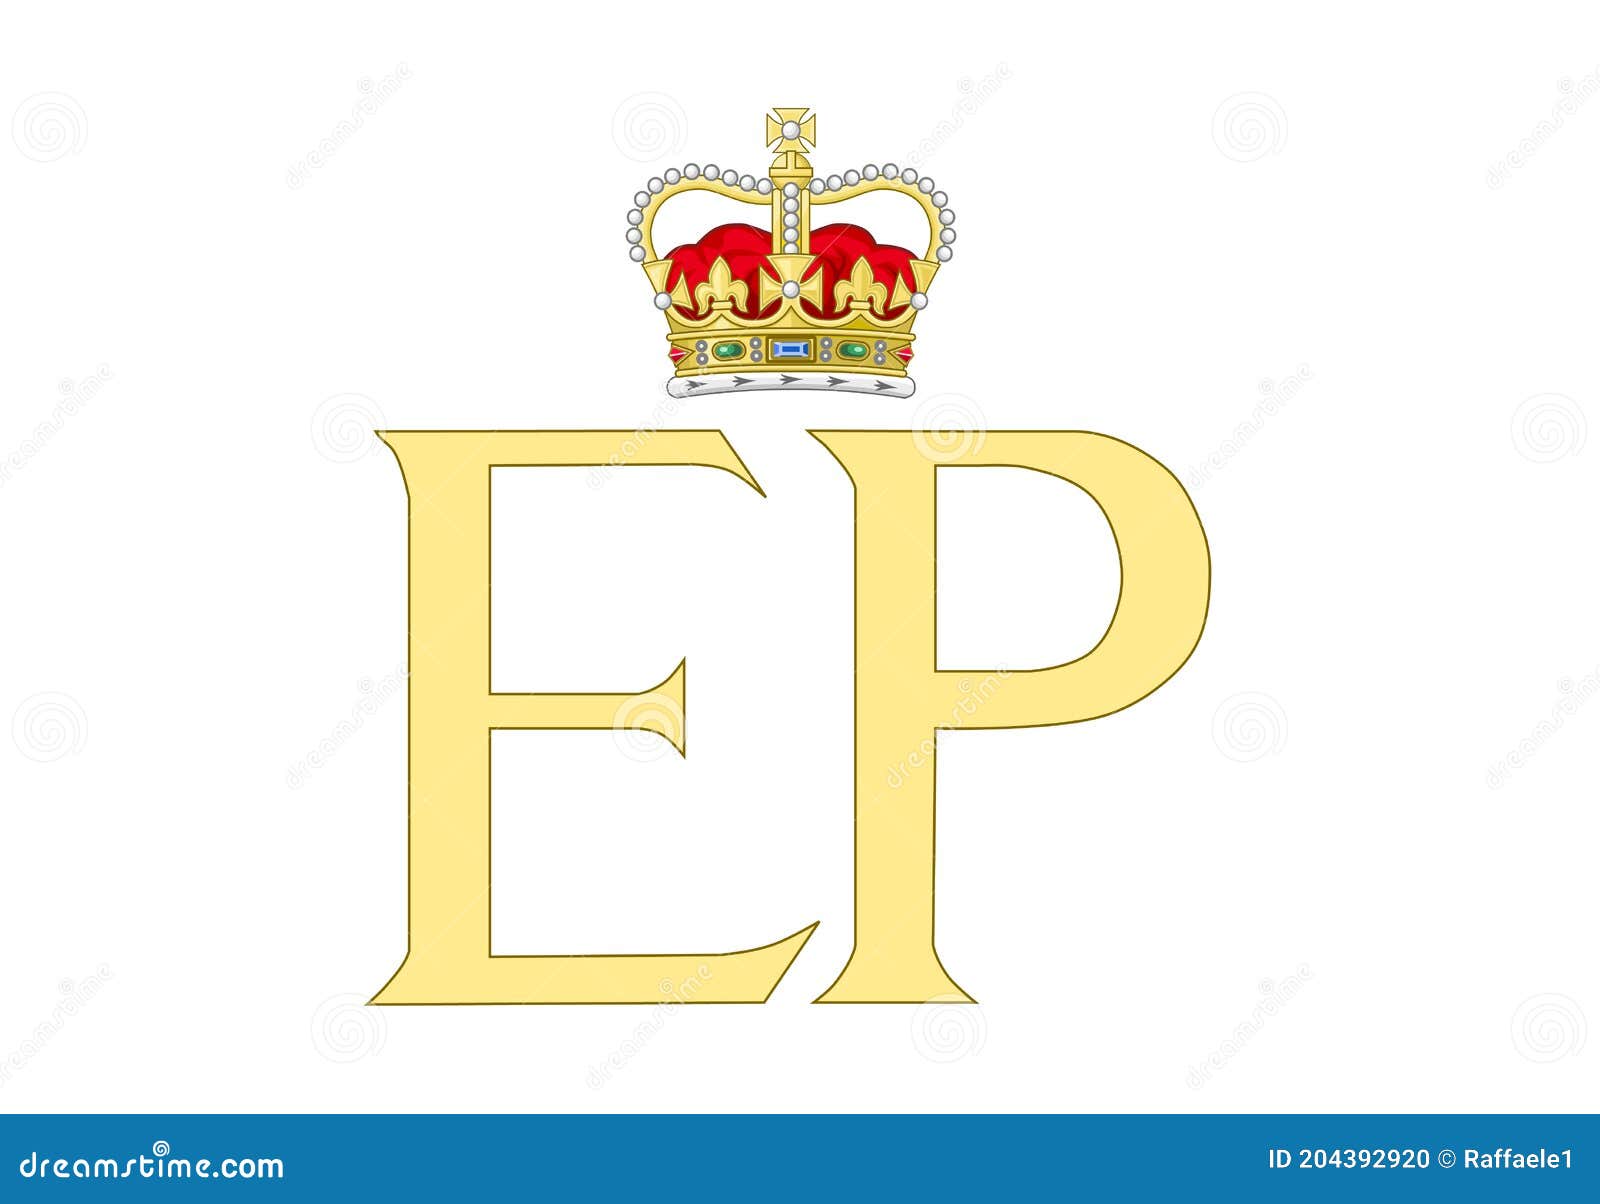 dual cypher of queen elizabeth and prince philip of great britain